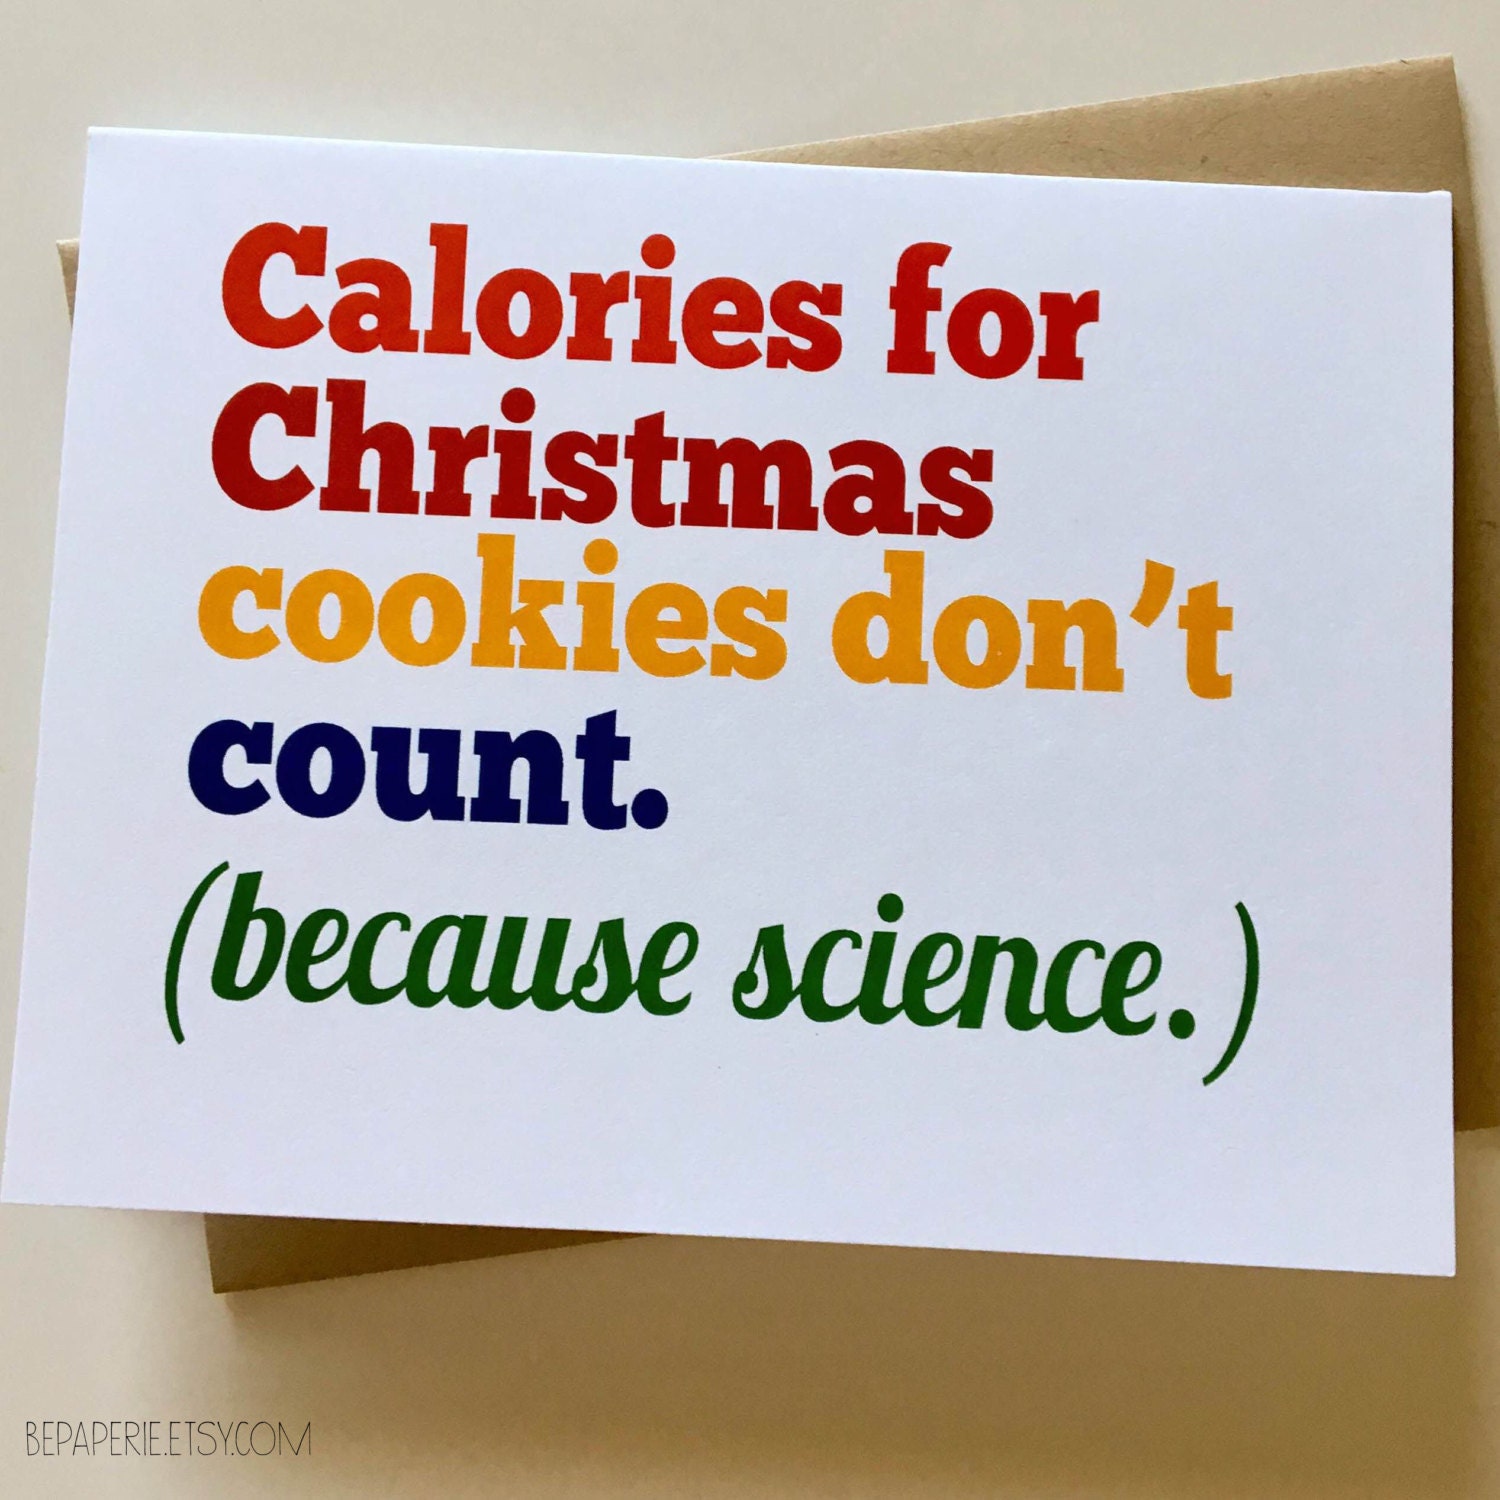 Calories for Christmas Cookies Don t Count Funny Christmas Card Humor Holiday Card